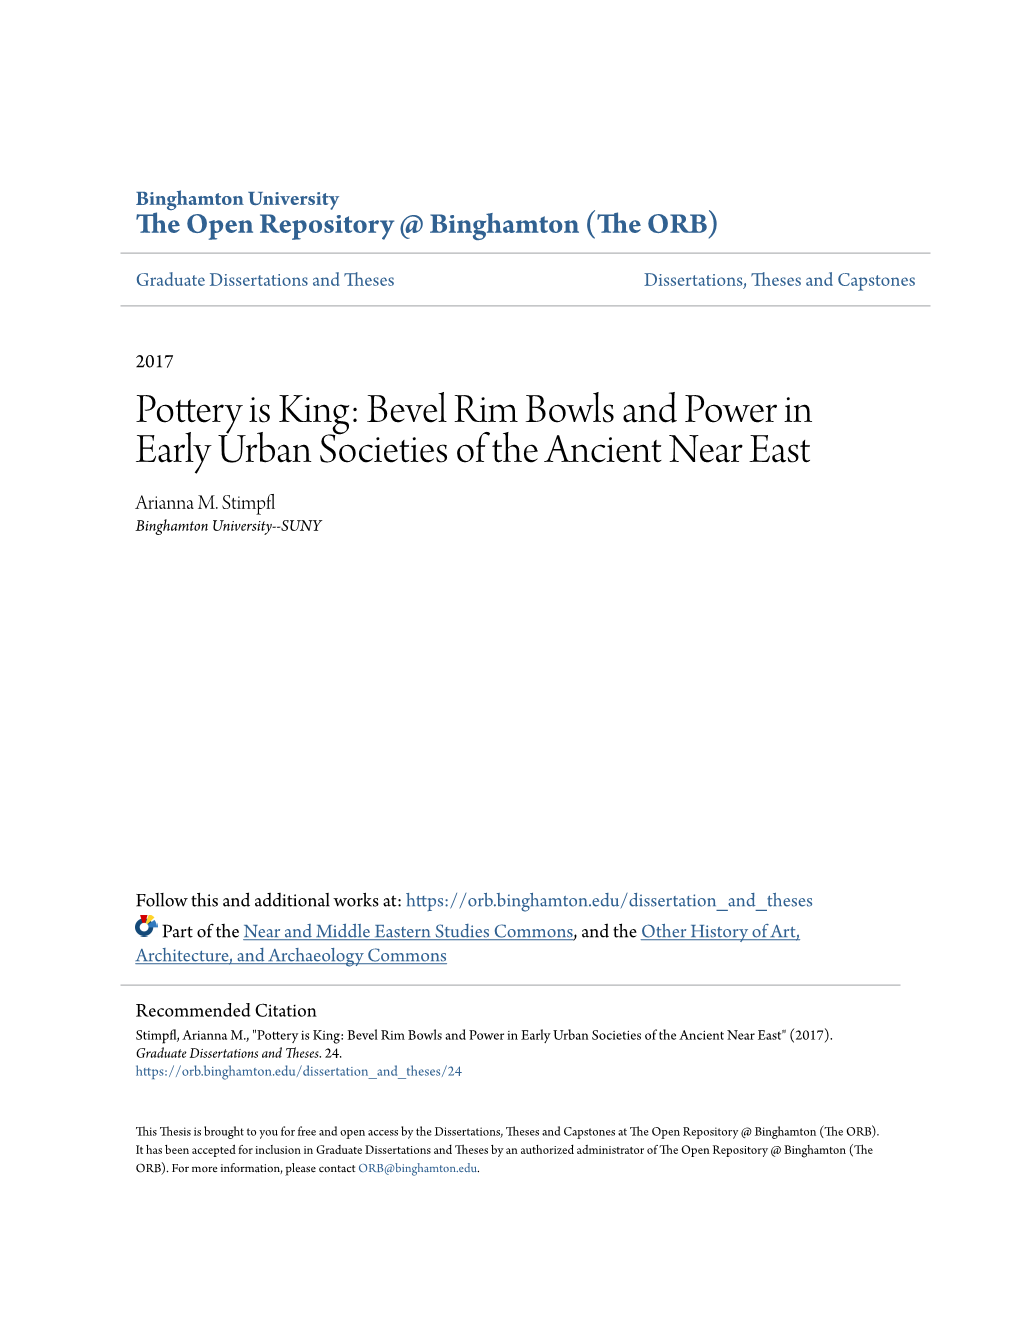 Pottery Is King: Bevel Rim Bowls and Power in Early Urban Societies of the Ancient Near East Arianna M